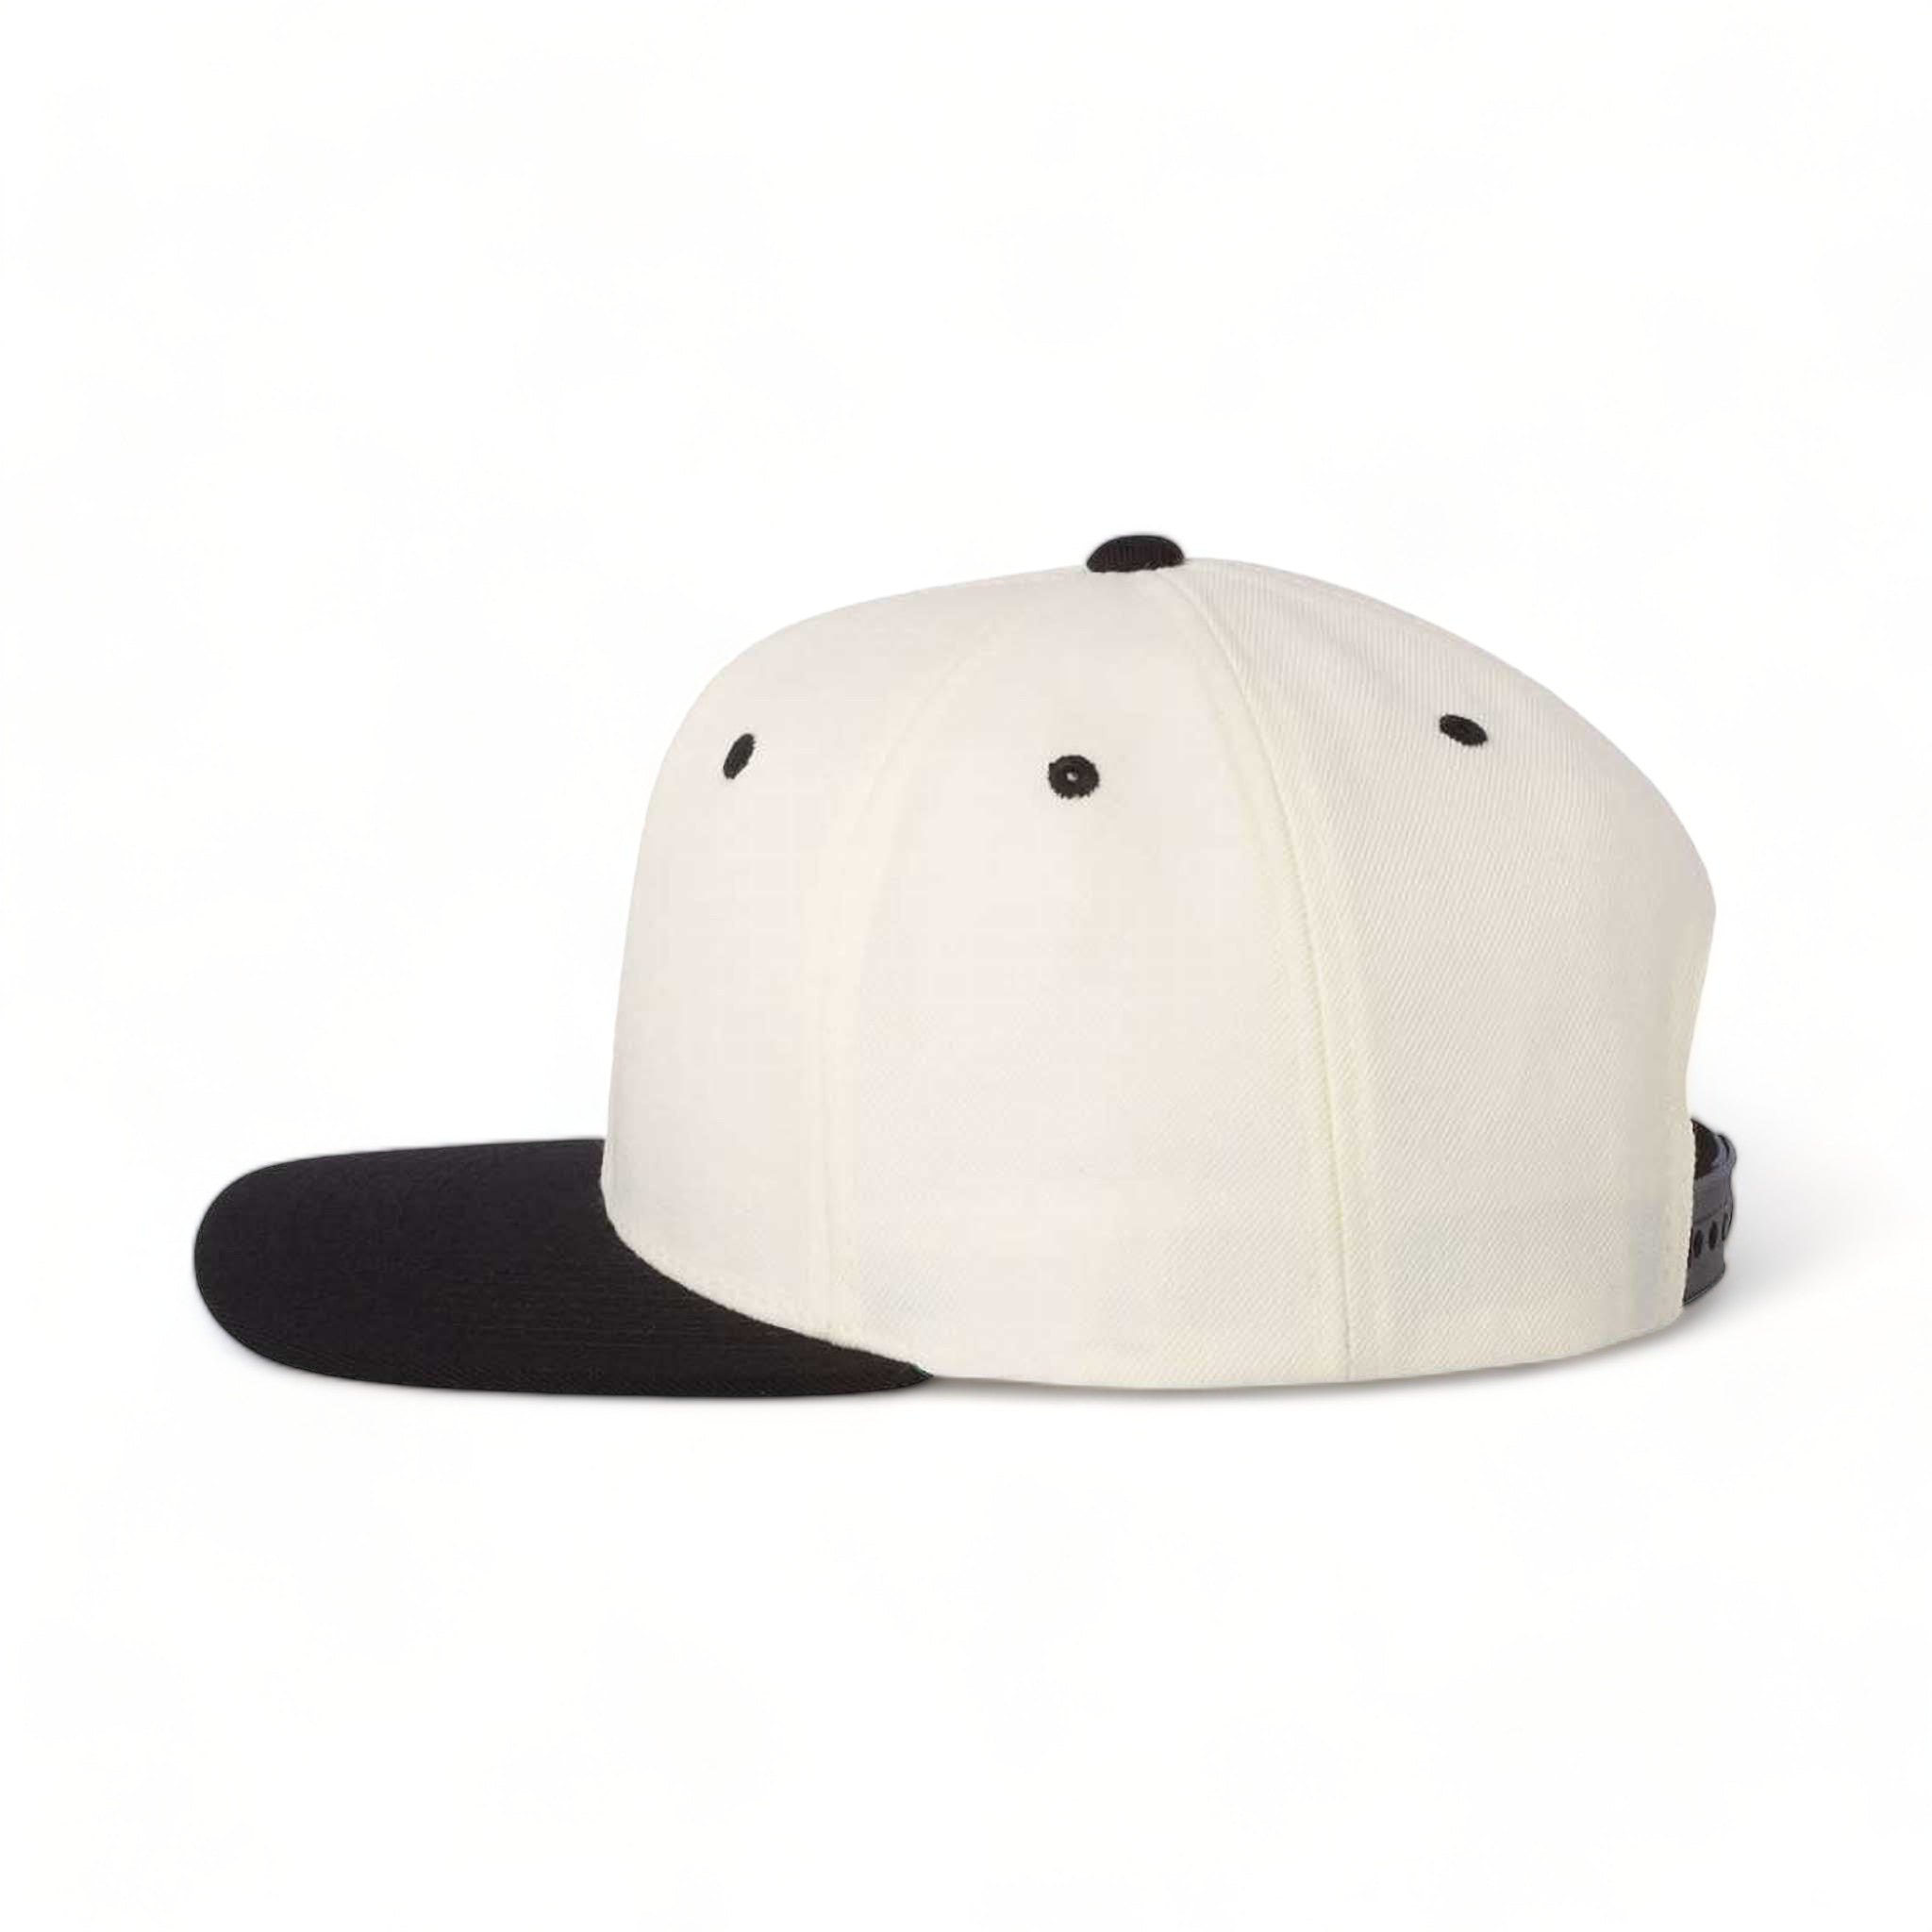 Side view of YP Classics 6089M custom hat in natural and black